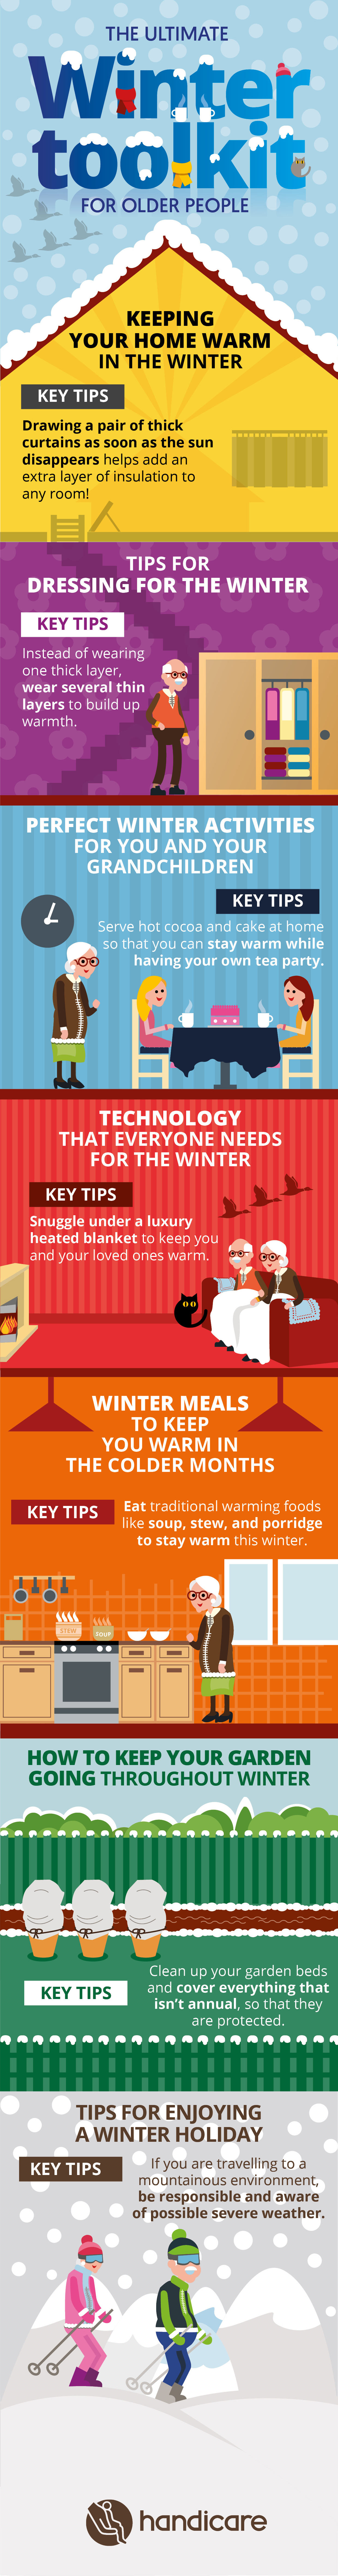 The ultimate winter toolkit for older people